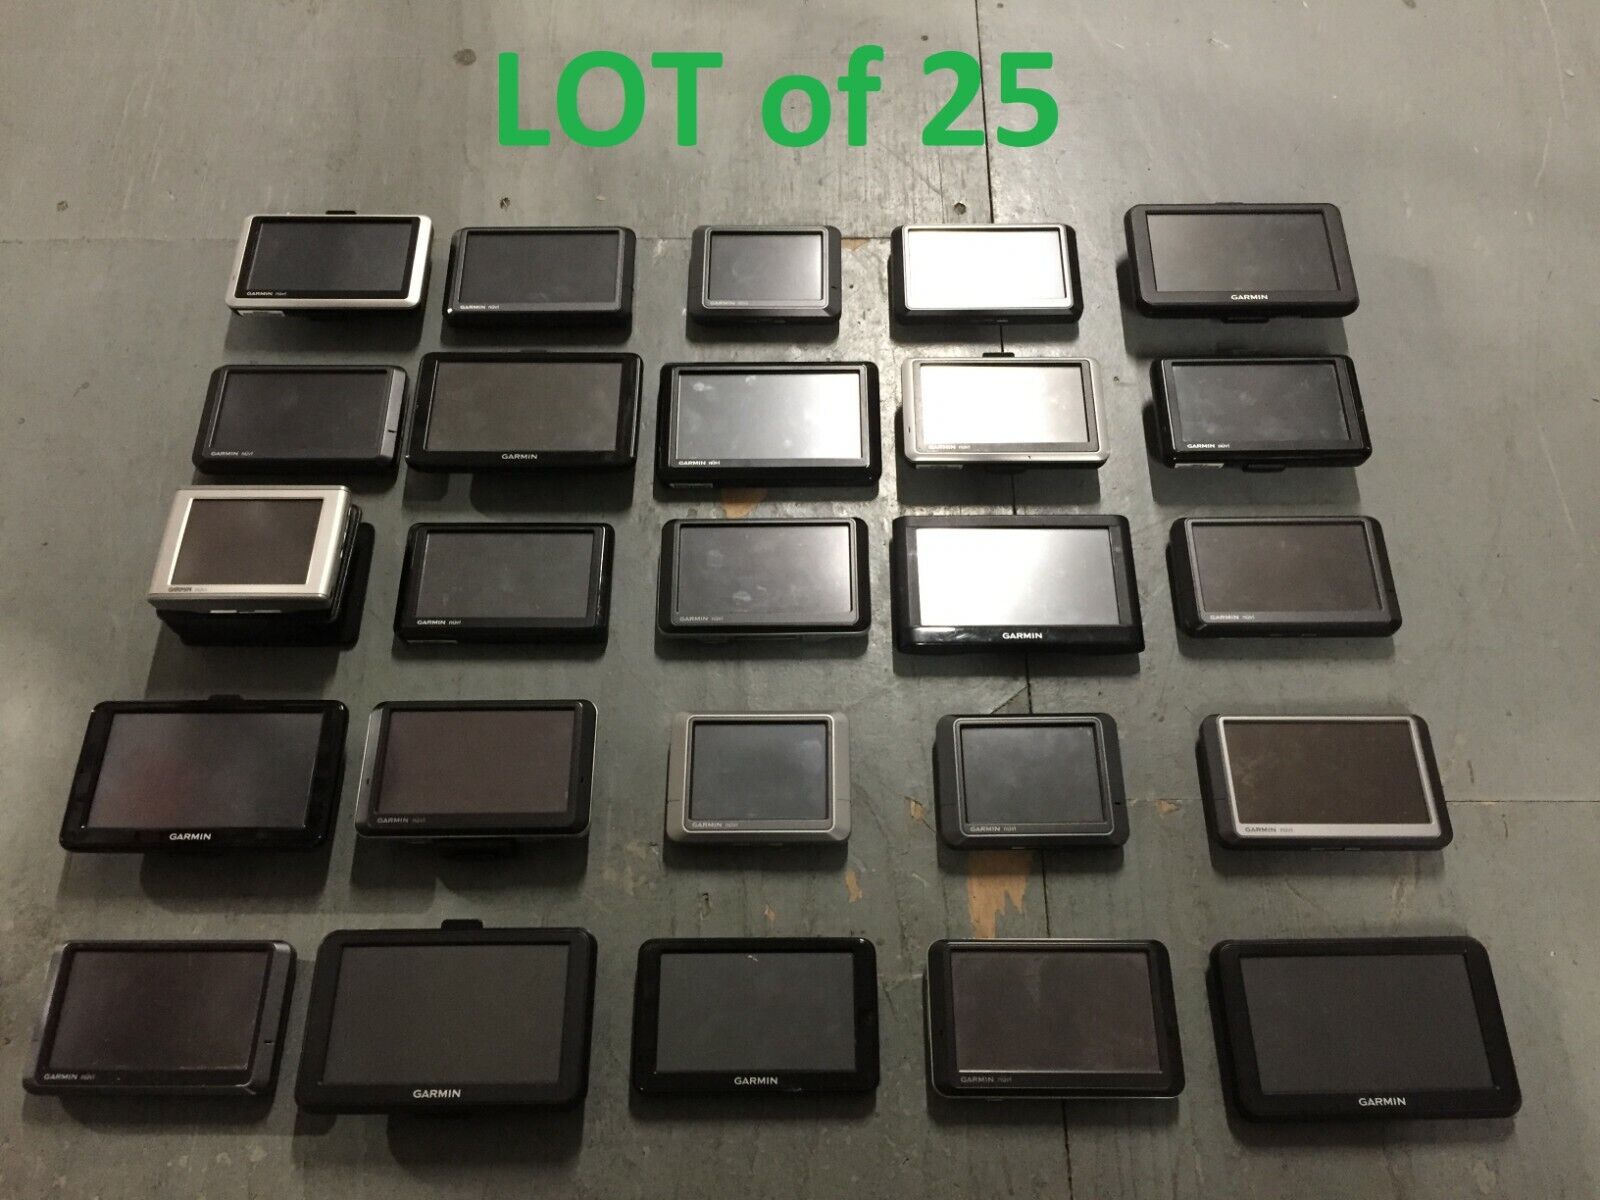 Lot of 25 Various Garmin GPS Units - All Working Great!! - Free Shipping!! Garmin Does Not Apply